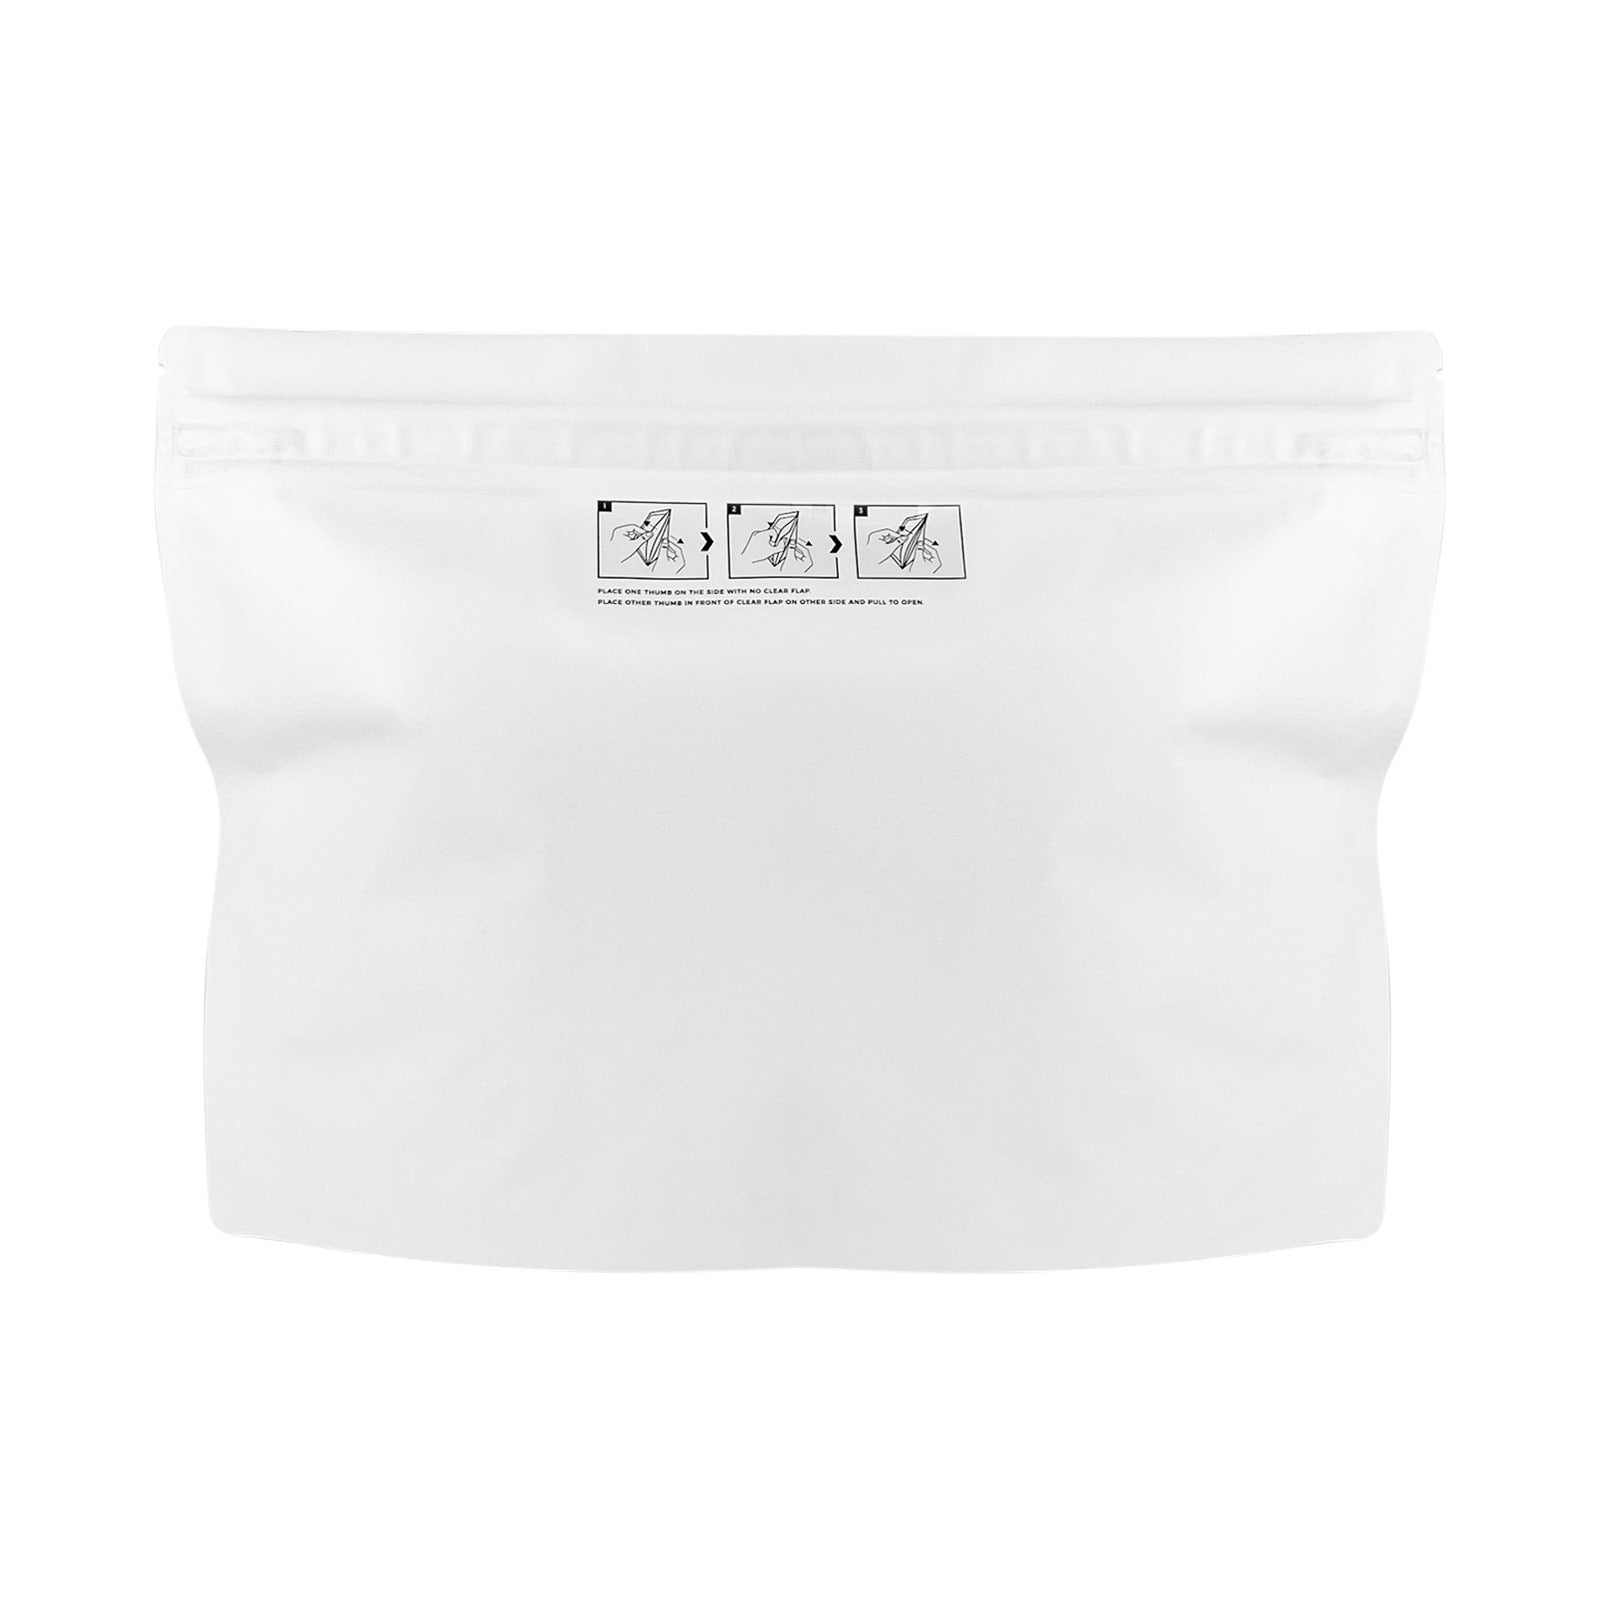 12"x9" Large Child Resistant Exit Bags All White - 500 Count